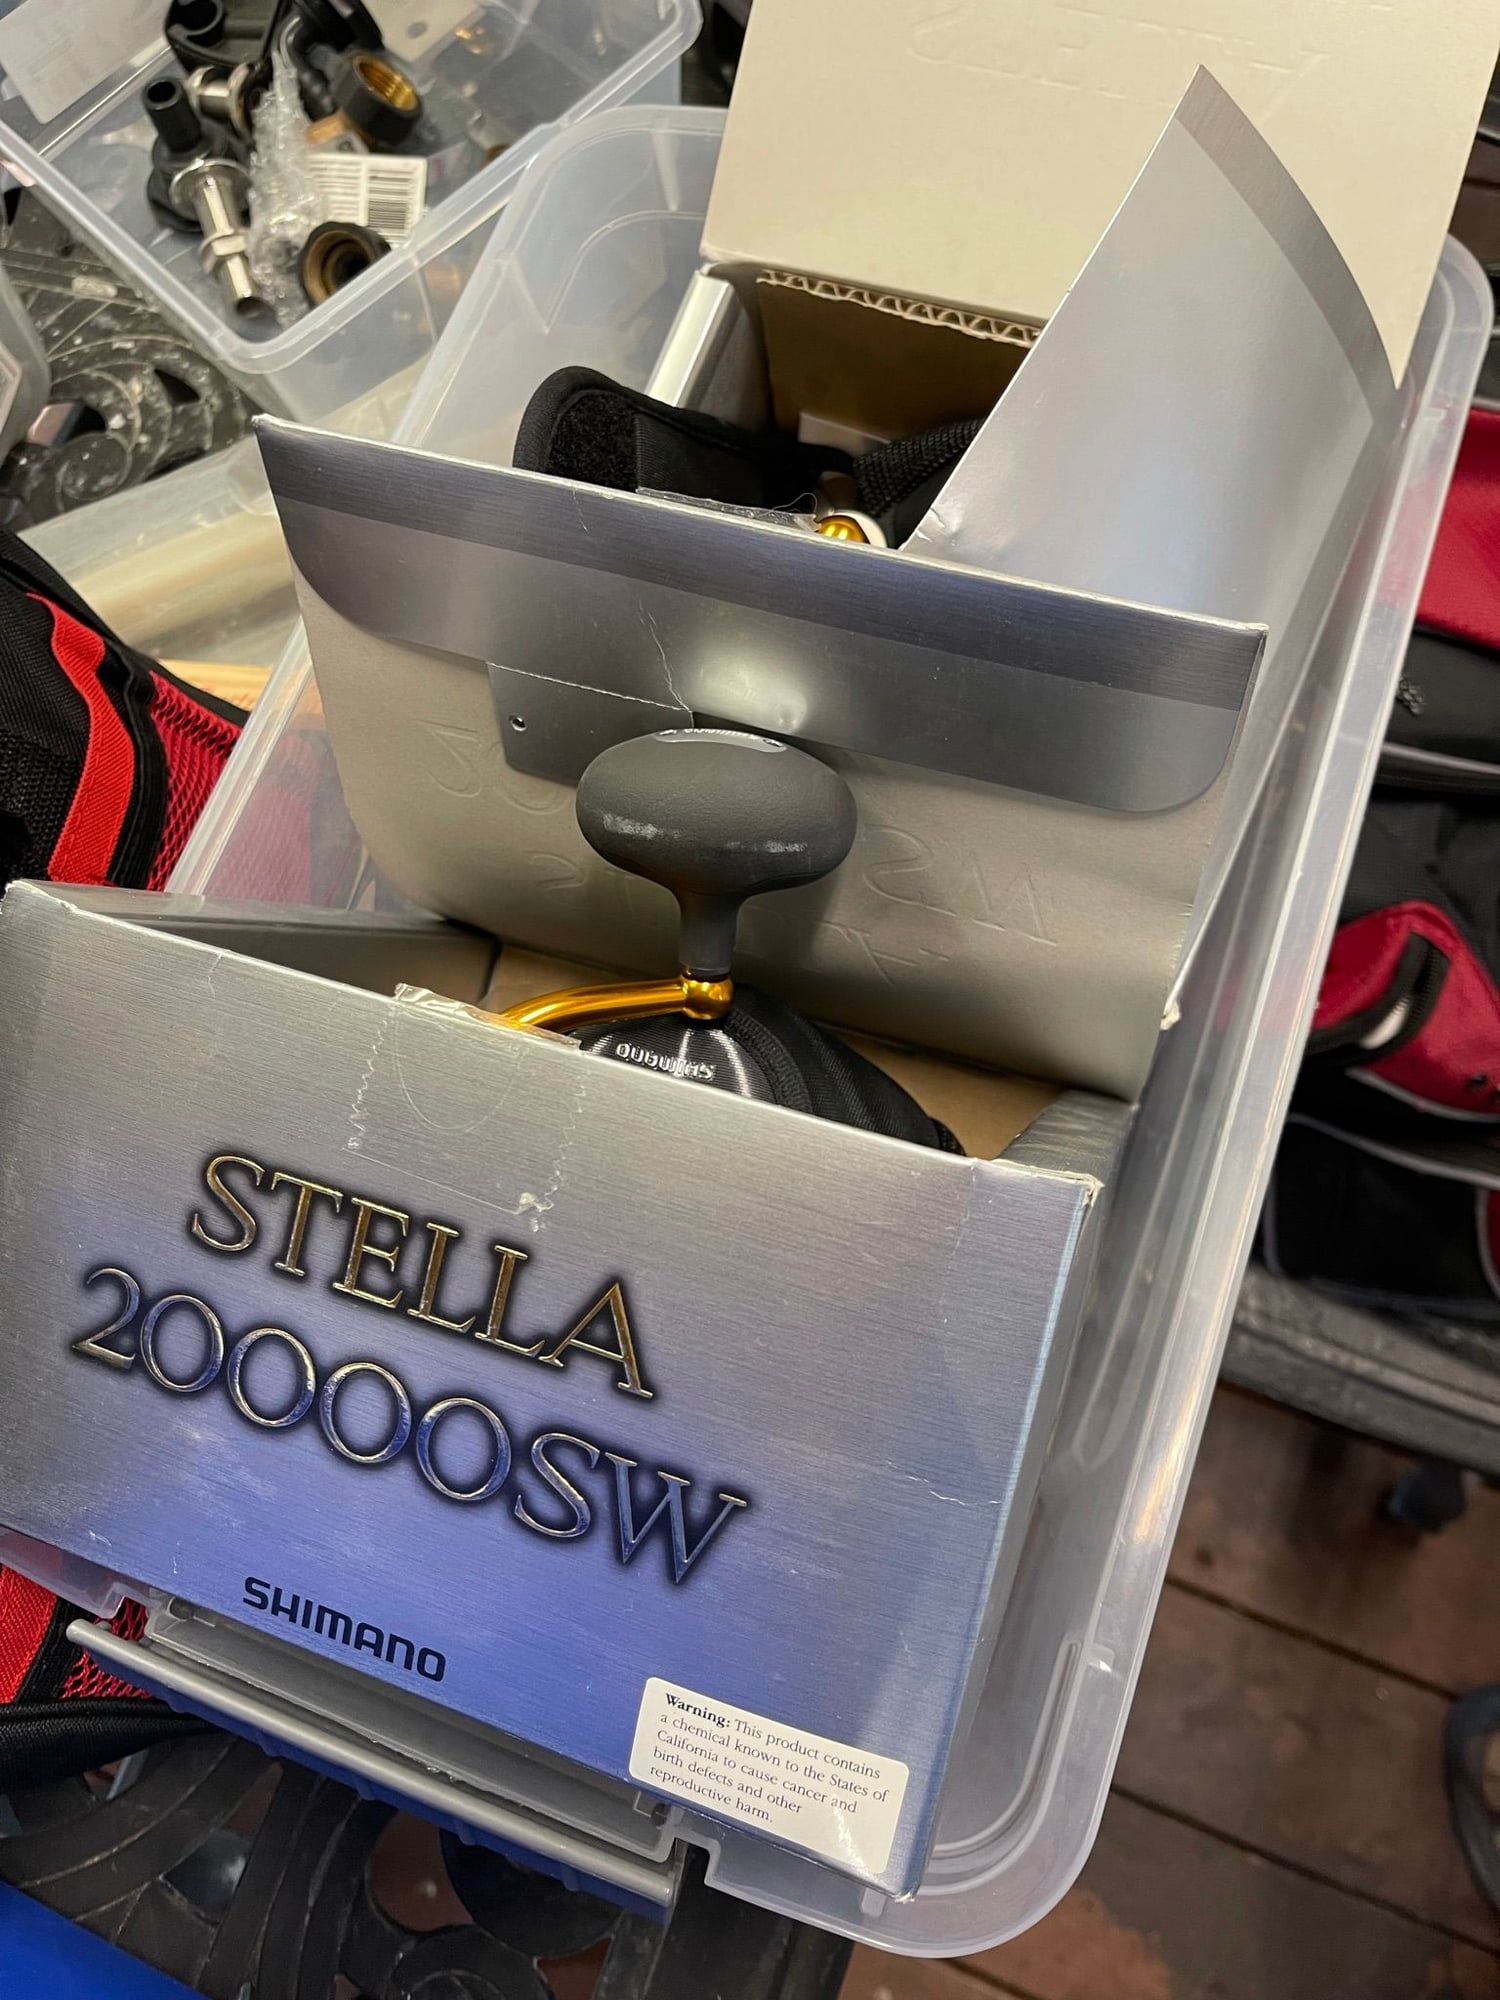 Shimano Stella 20000SW Reel - BRAND NEW IN BOX, NEVER USED - The Hull Truth  - Boating and Fishing Forum